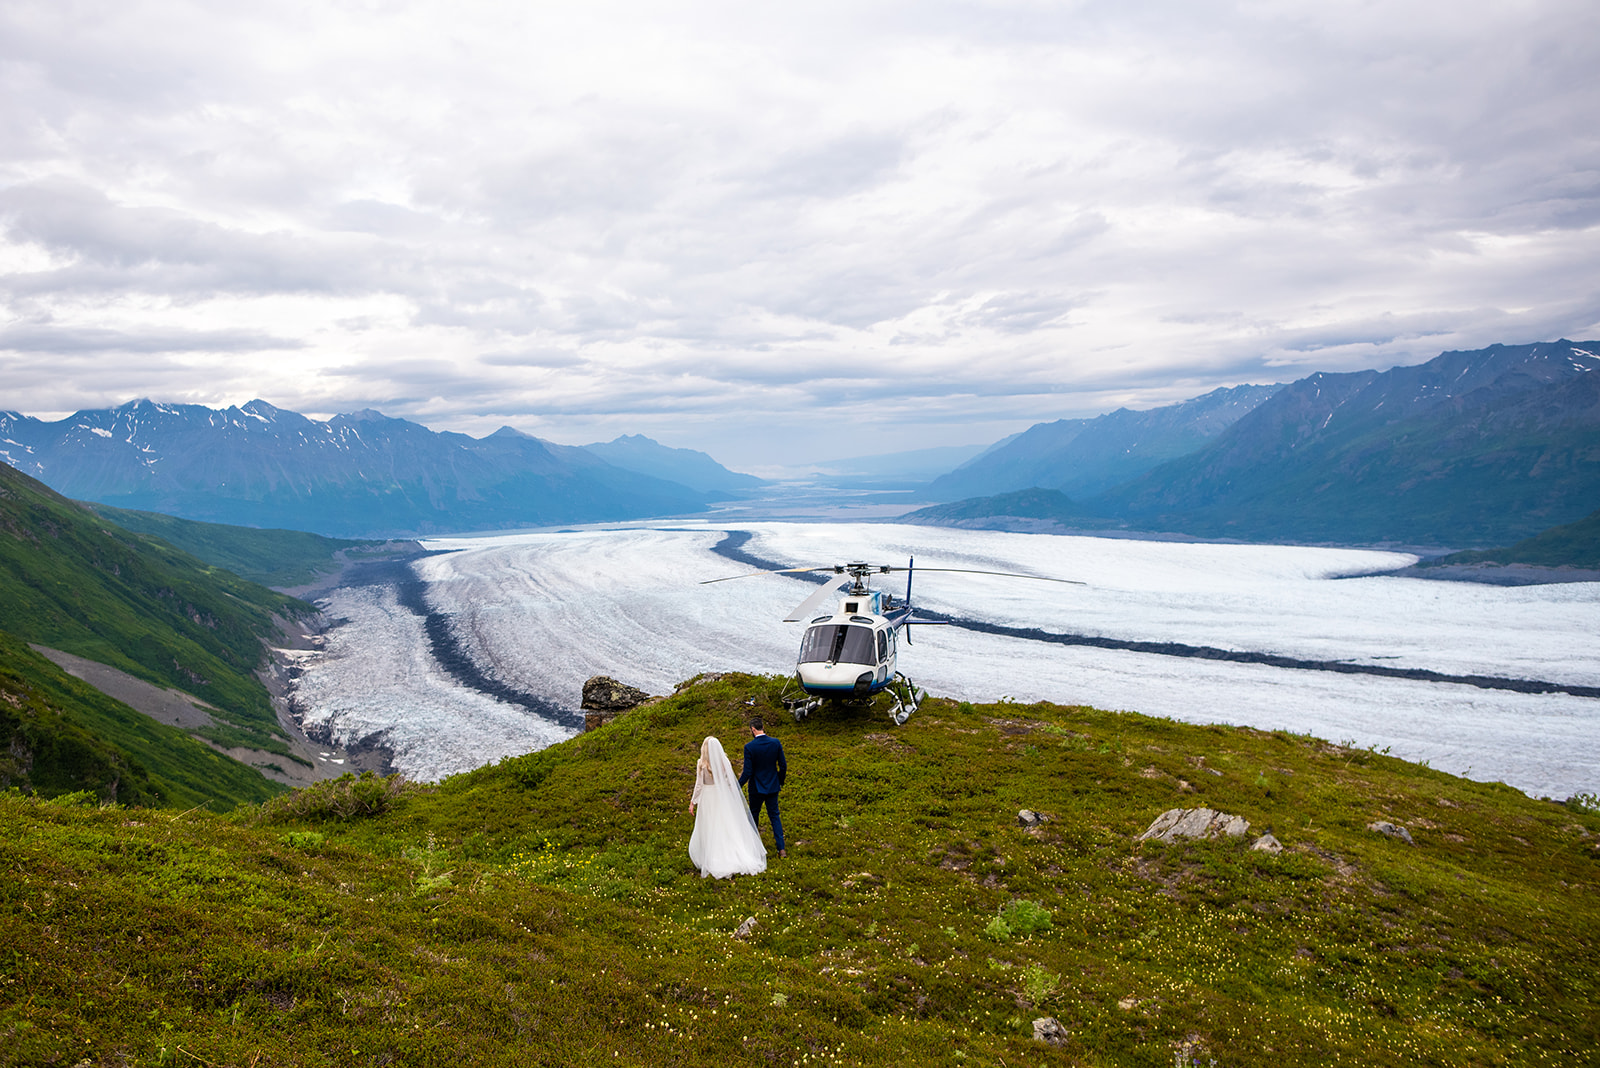 Let Love Take You To New Heights With A Helicopter Elopement in Alaska